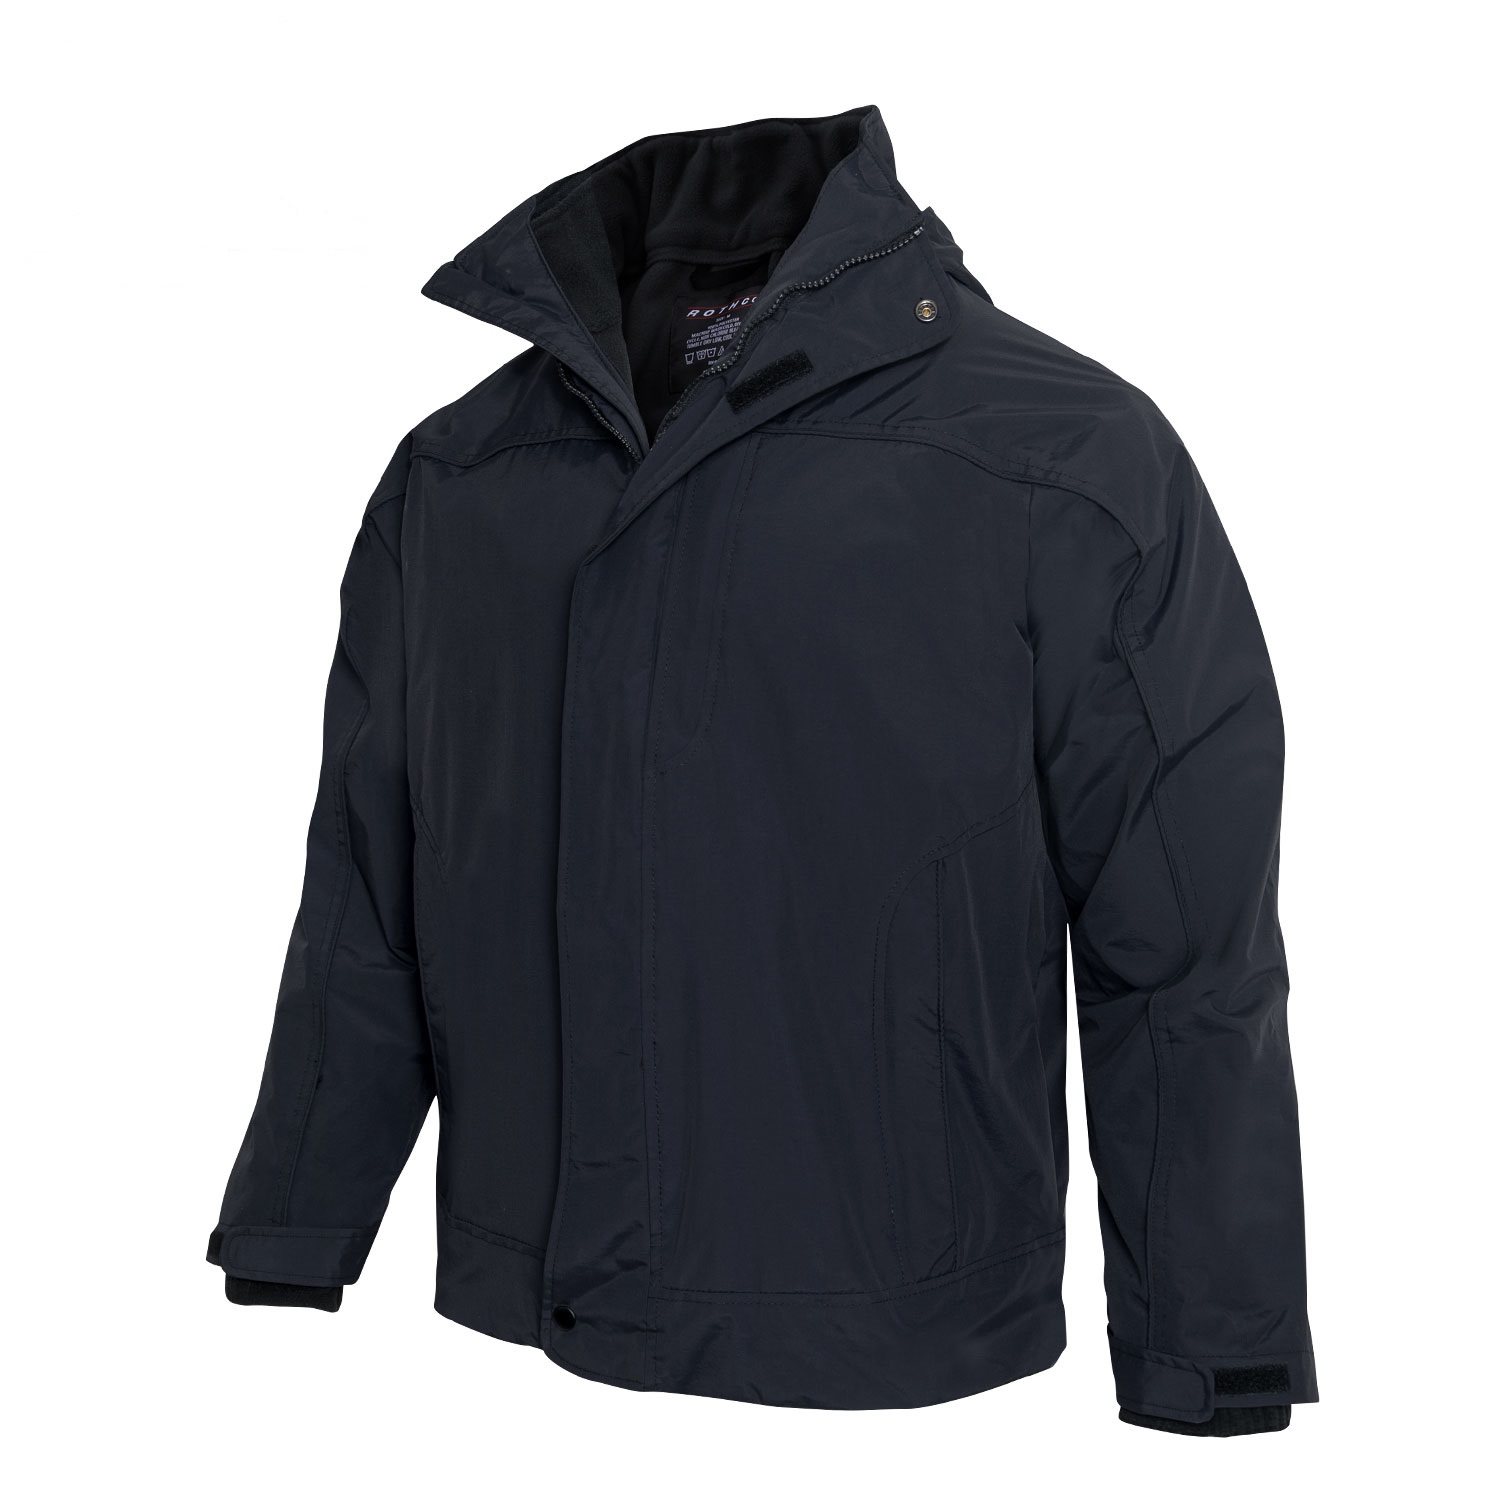 ALL WEATHER 3in1 jacket MIDNIGHT NAVY BLUE ROTHCO 1857 L-11